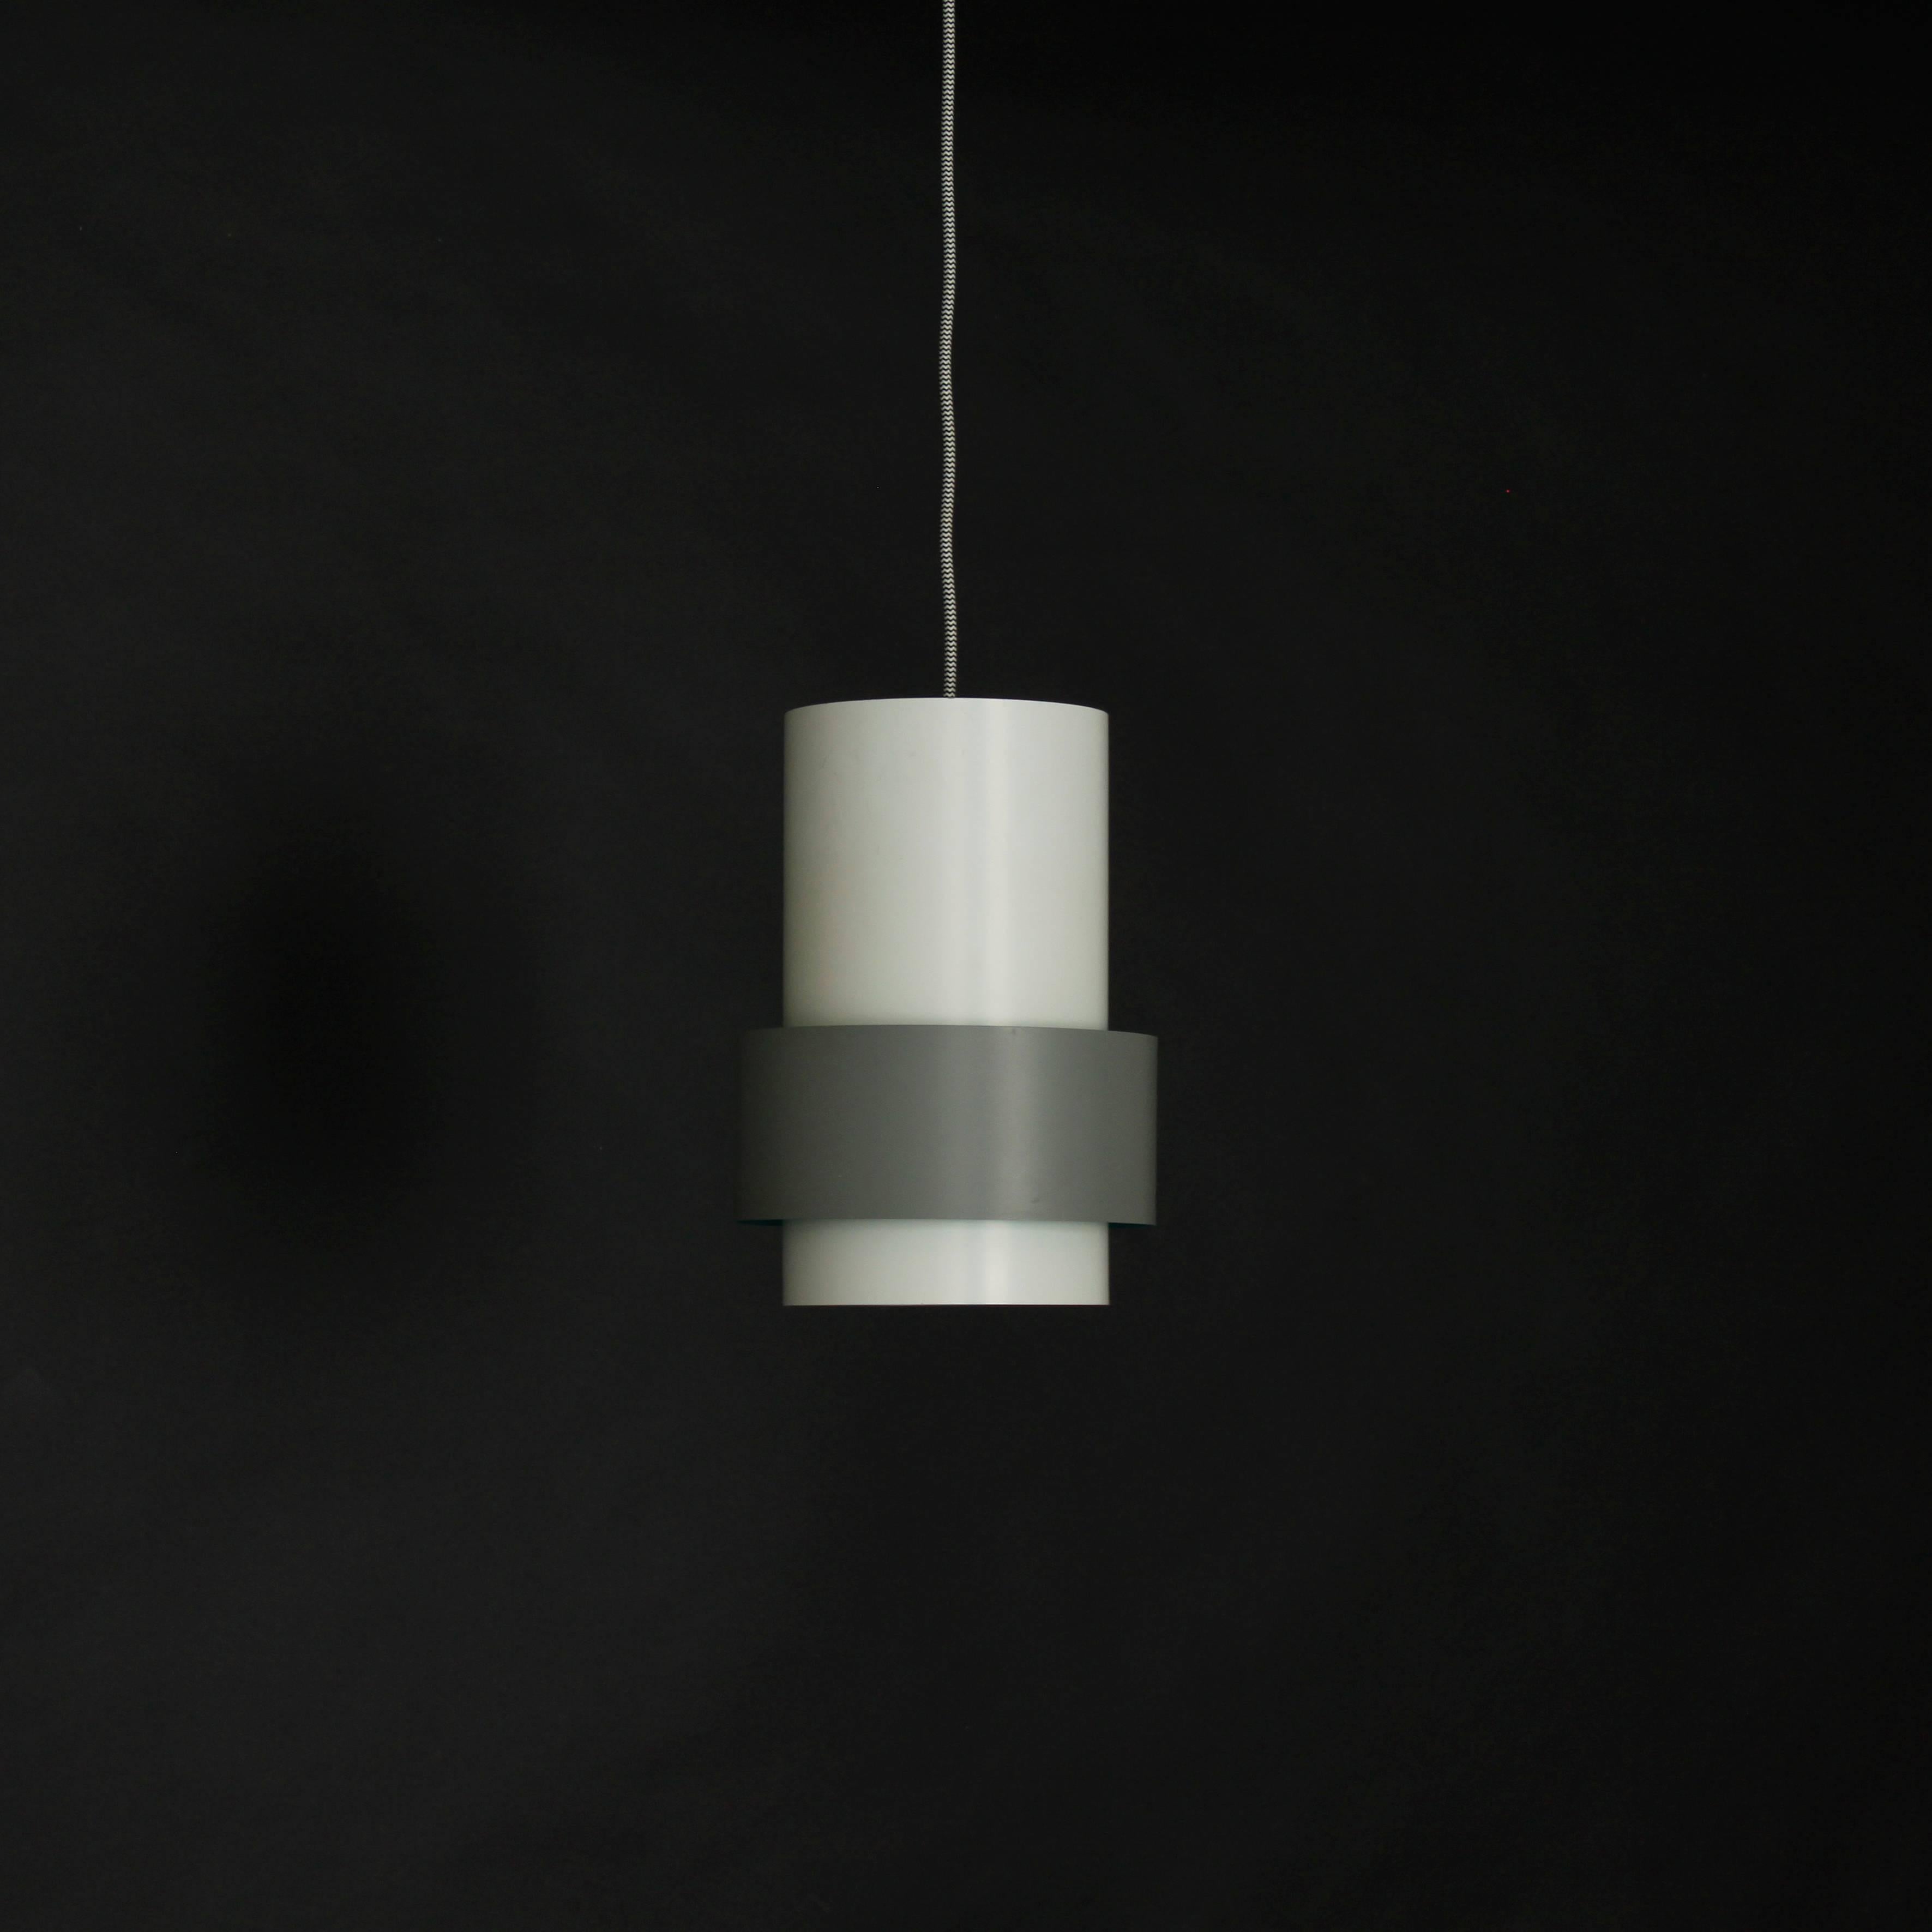 A cylindrical suspension lamp designed in Denmark by Jo Hammerborg for Fog & Morup. White lacquered steel with grey lacquered outer band inside which the metal is lacquered eu de nil green producing a subtle presence of color when illuminated.